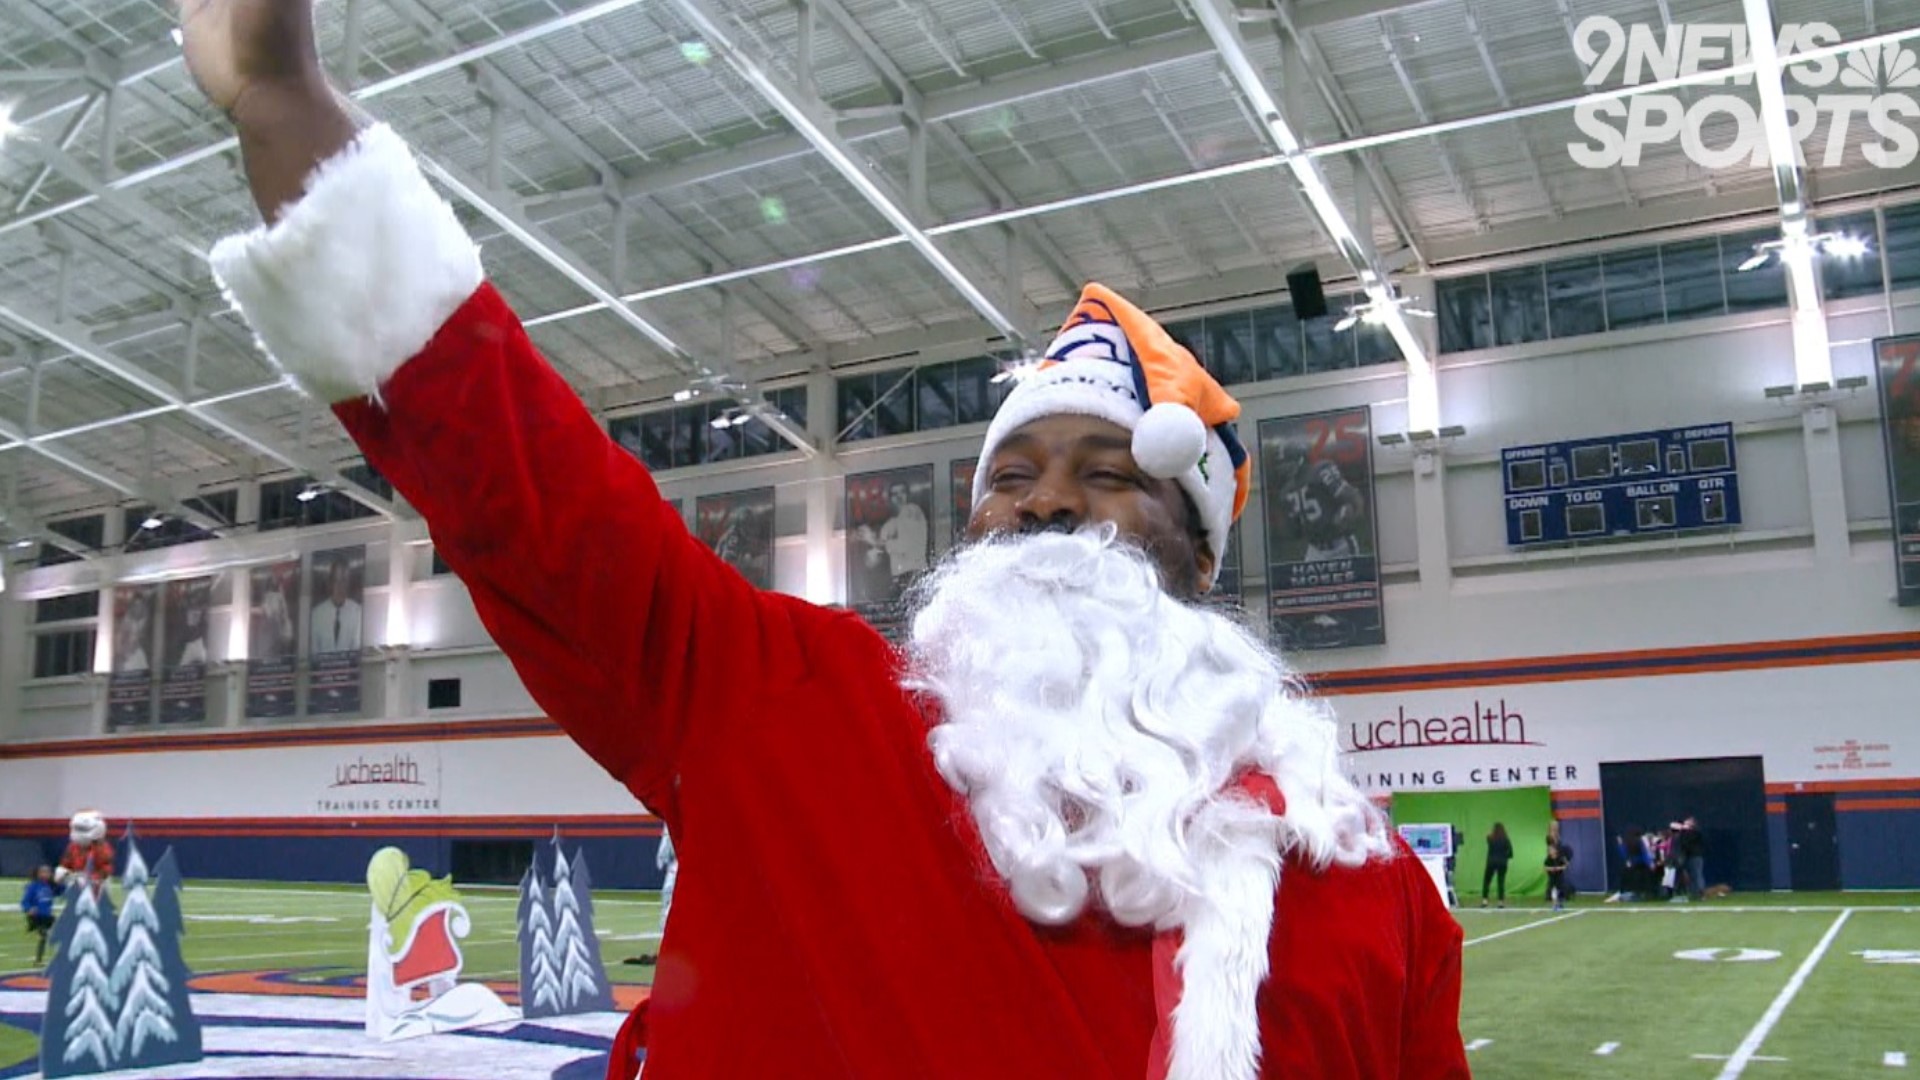 Broncos nose tackle Shelby Harris dressed up as Santa Claus and entertained children at the Pat Bowlen Fieldhouse for the holiday season.